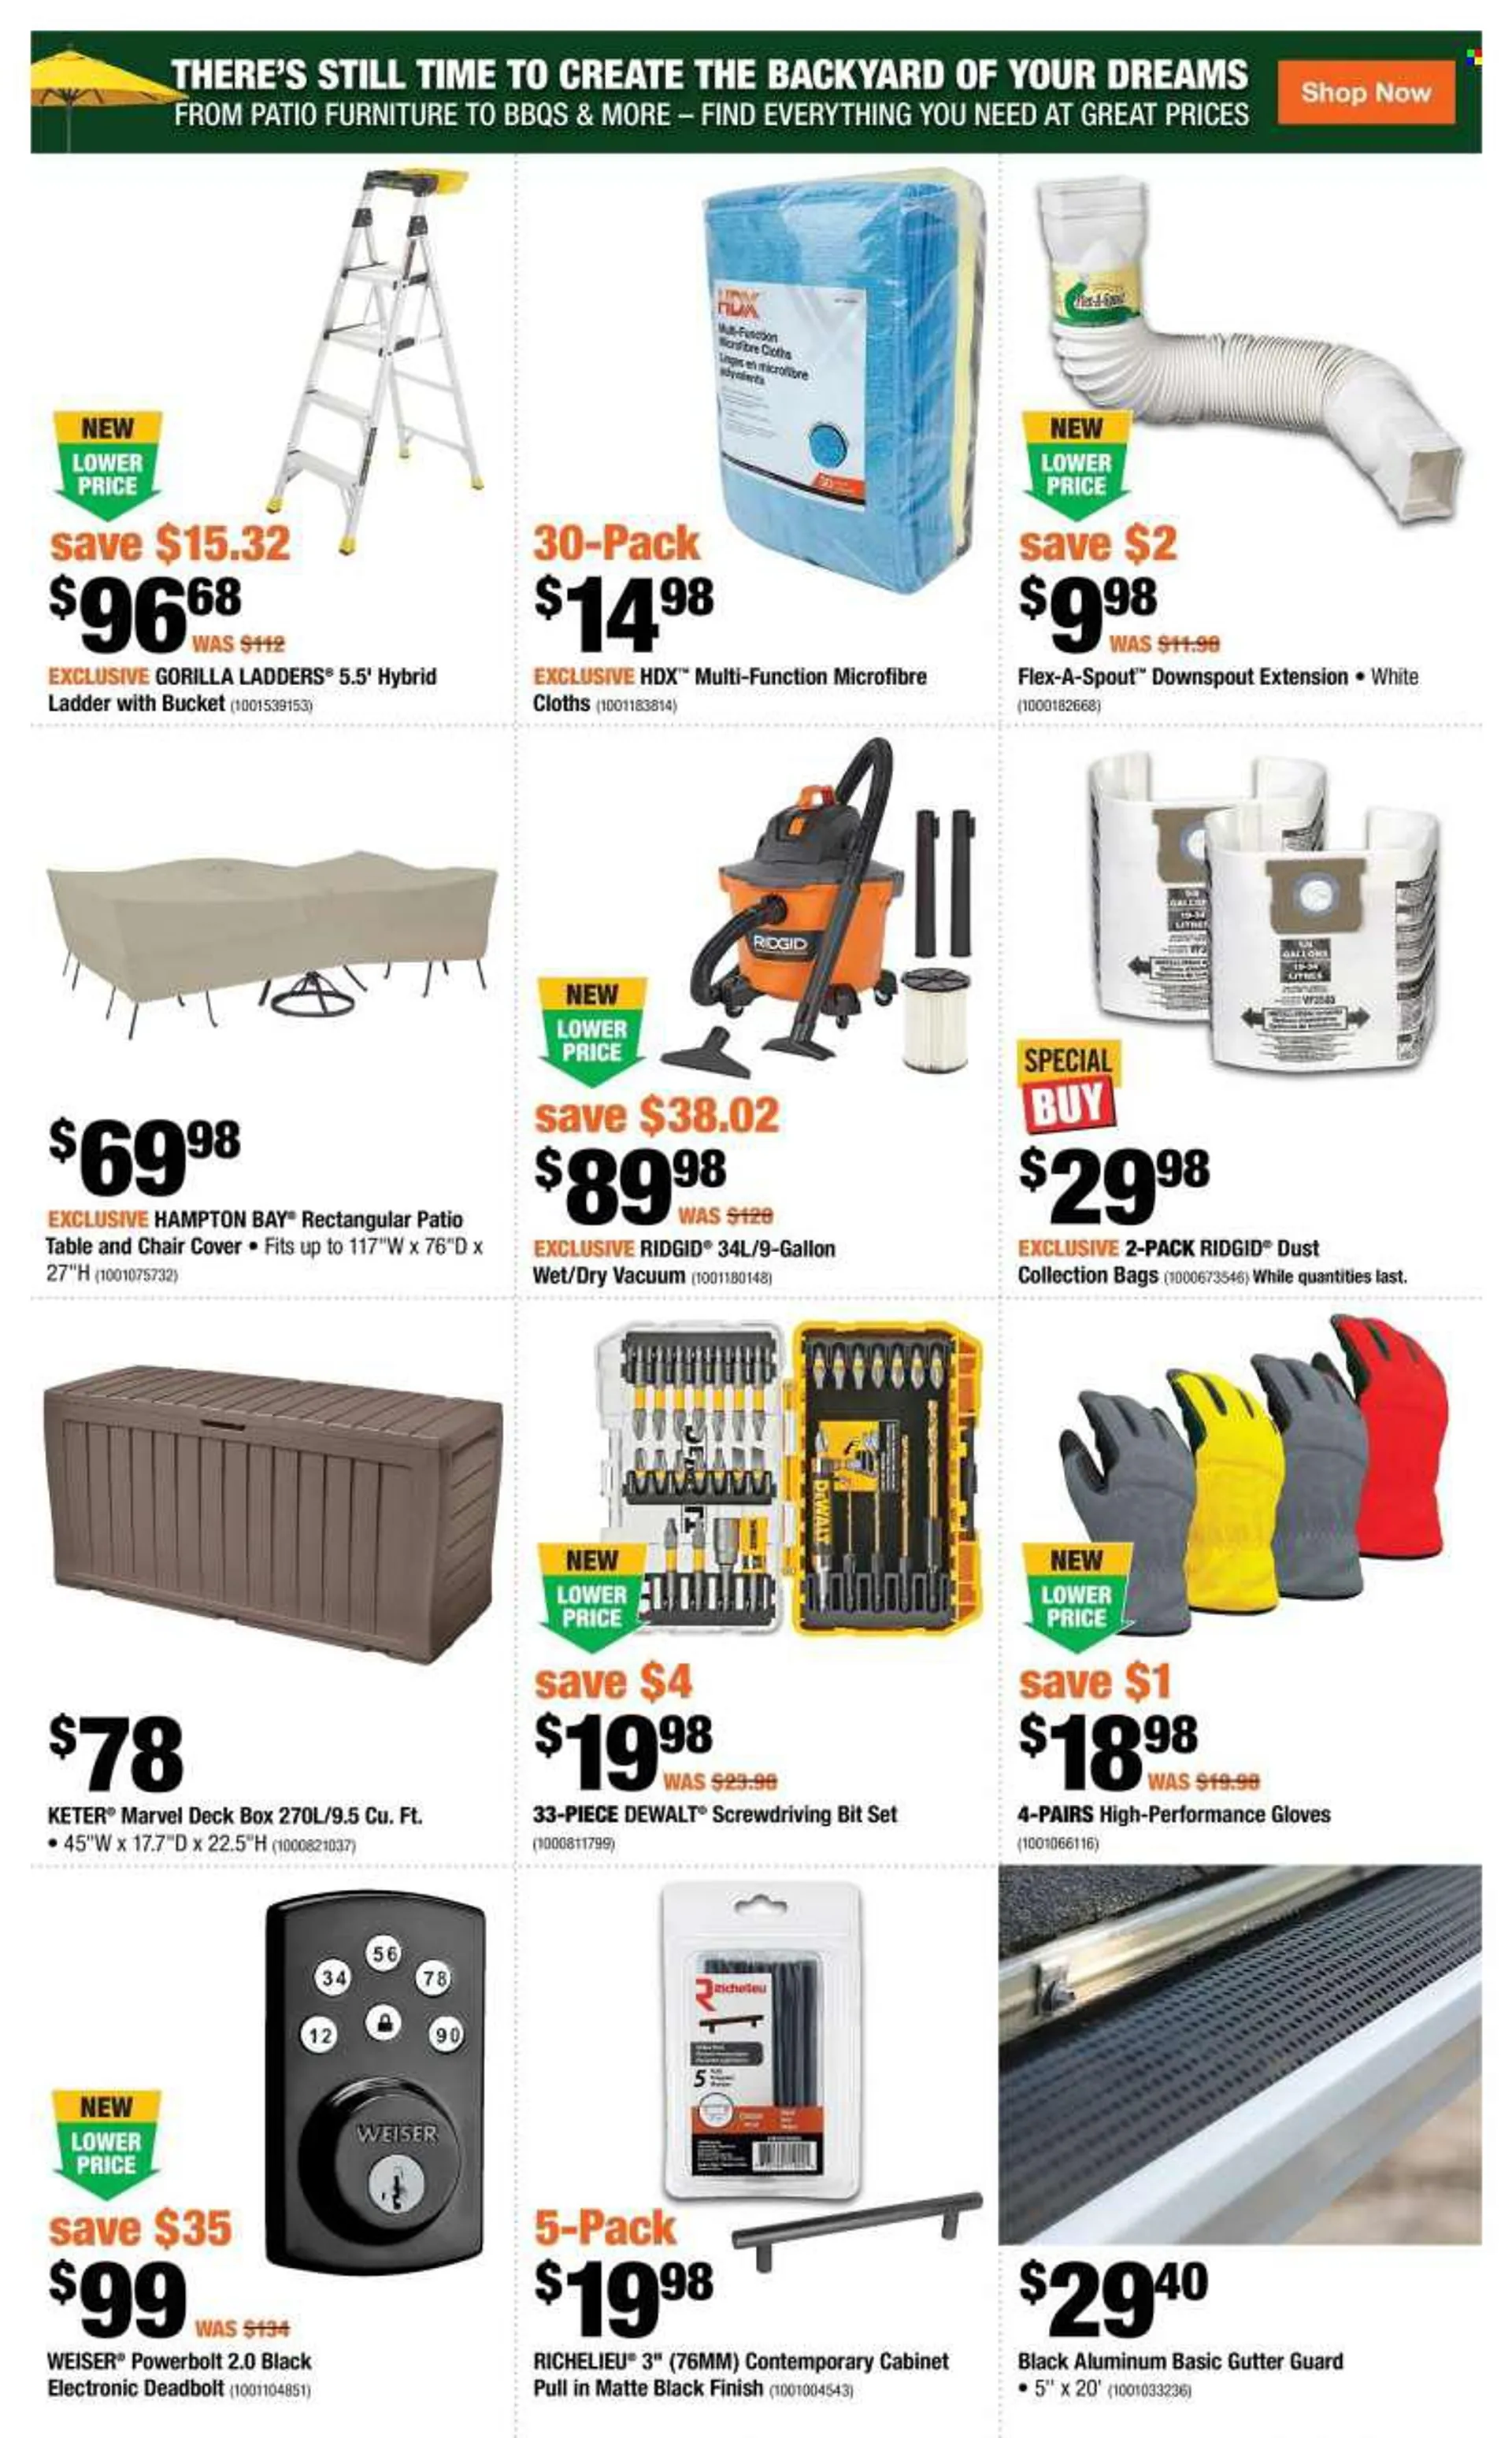 The Home Depot Flyer - August 11, 2022 - August 17, 2022 - Sales products - gallon, gloves, vacuum cleaner, cabinet, table, chair, Patio, patio furniture, ladder, electronic deadbolt, DeWALT, Ridgid, work gloves. Page 4.